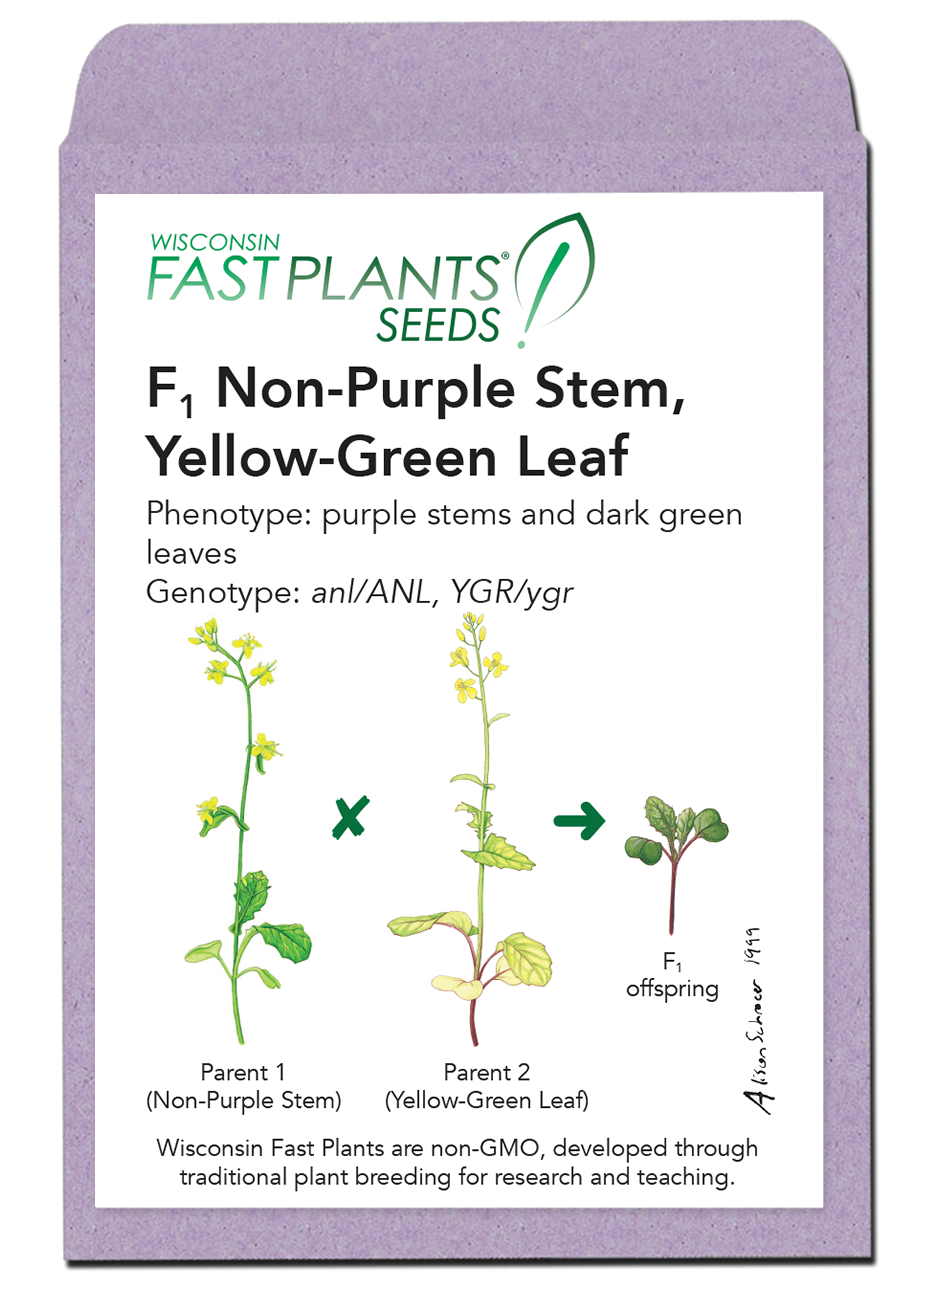 F1 Non-Purple Stem, Yellow-Green Leaf seed packet